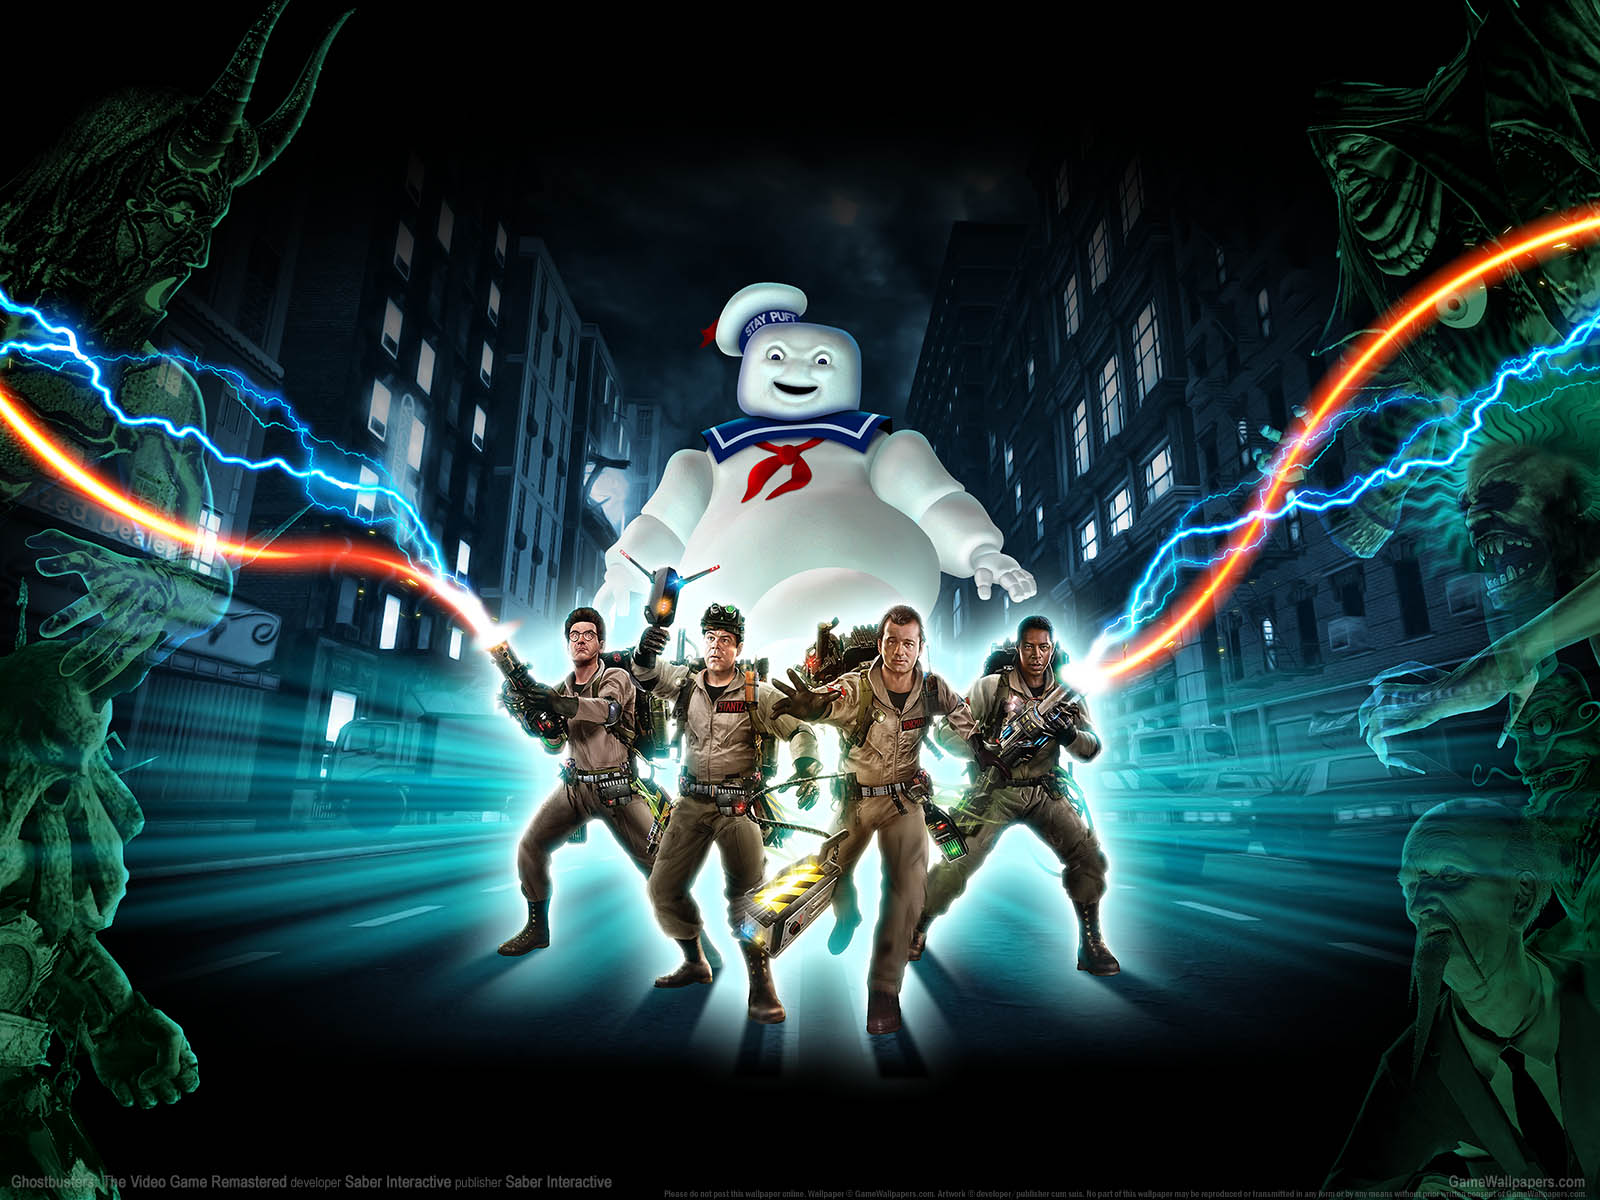 Ghostbusters%3A The Video Game Remastered Hintergrundbild 01 1600x1200